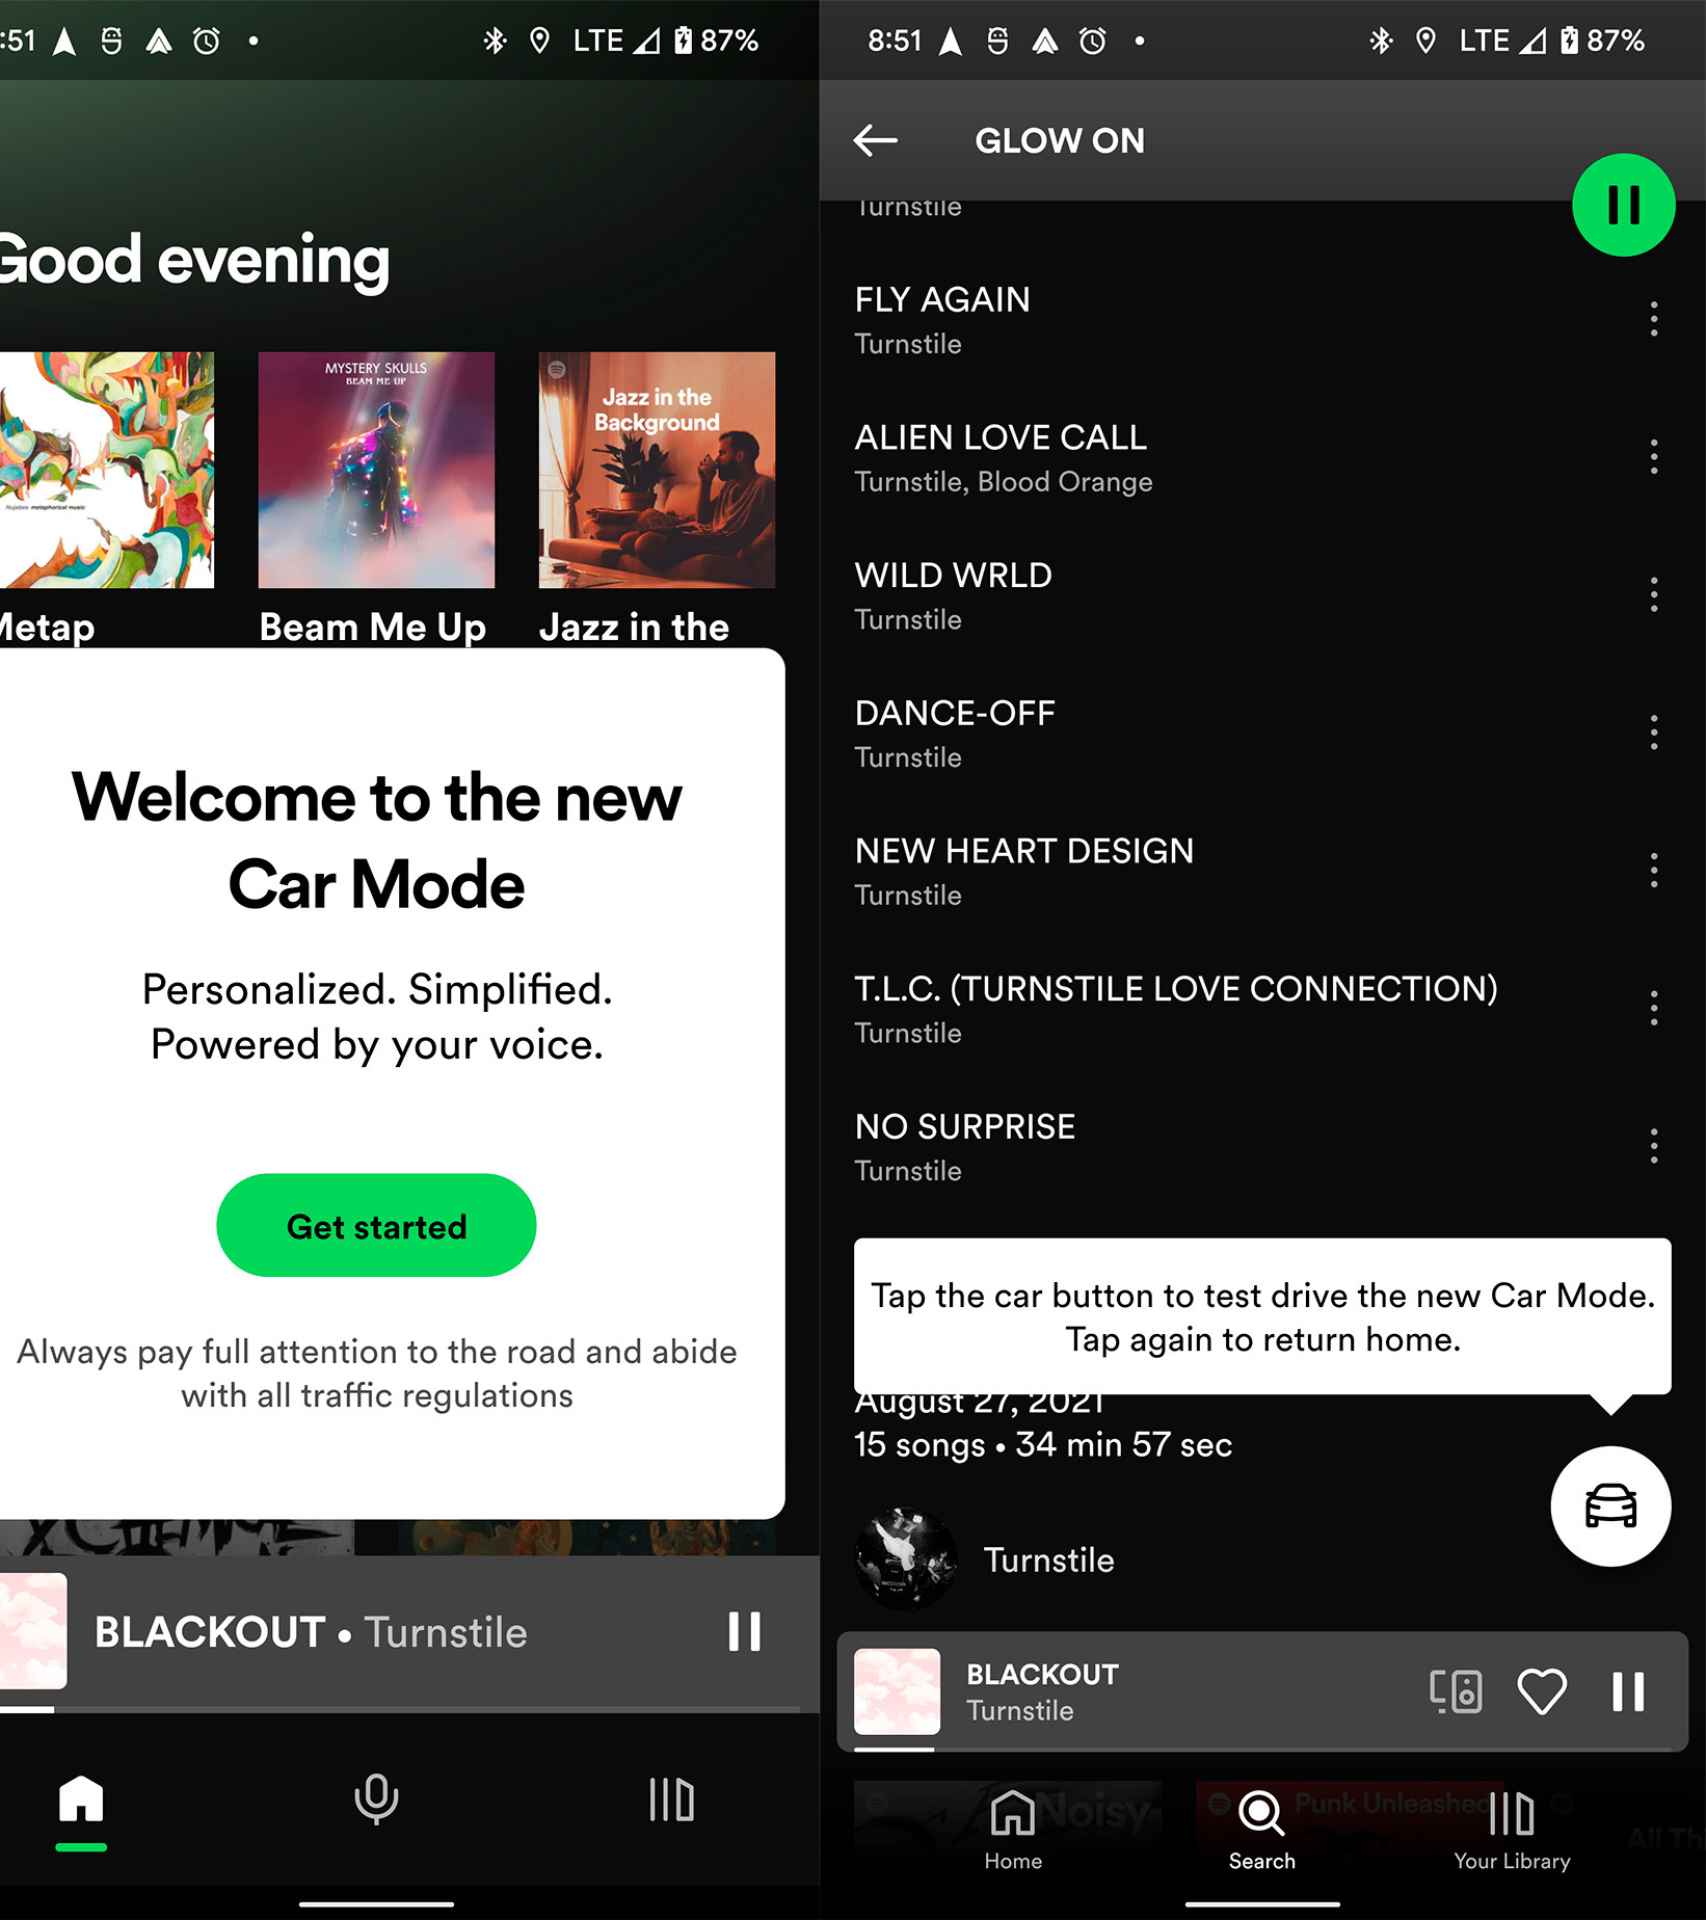 Spotify's new Car Mode